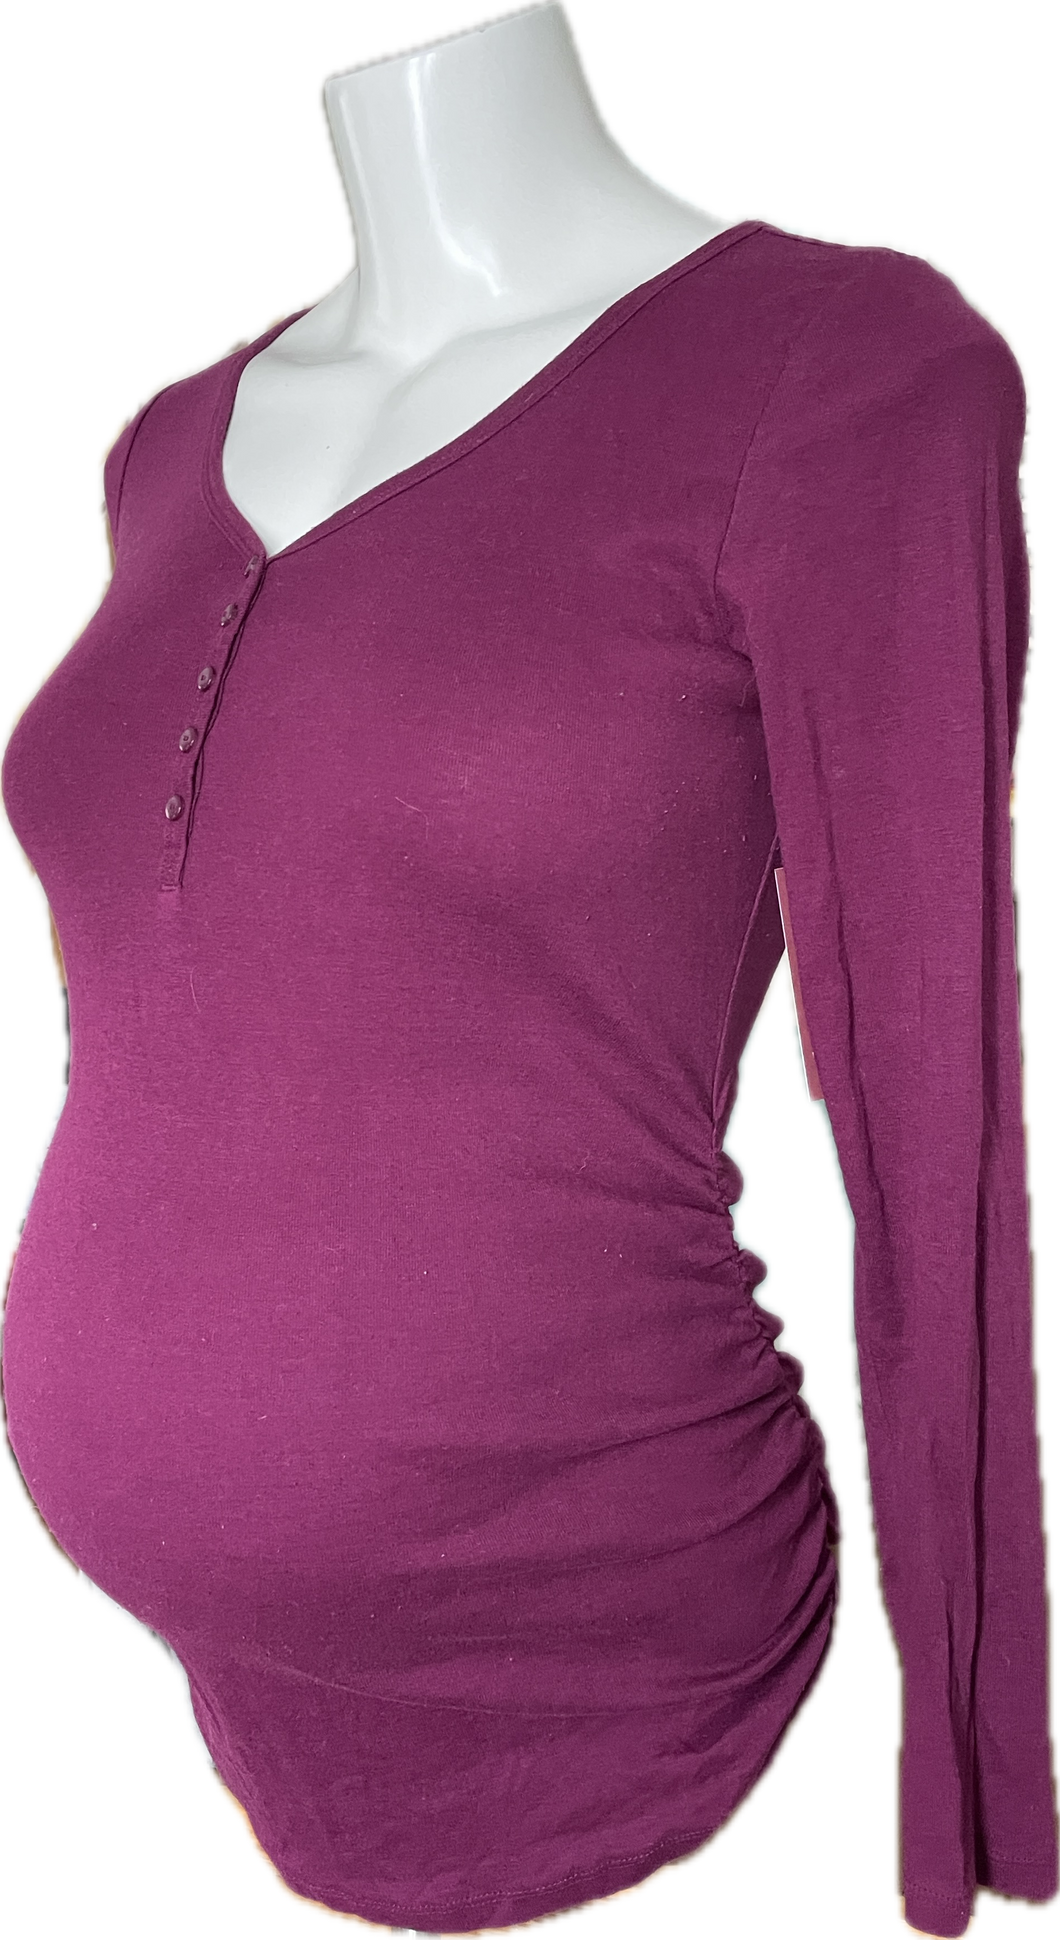 S Old Navy Maternity Long Sleeve top in Raspberry